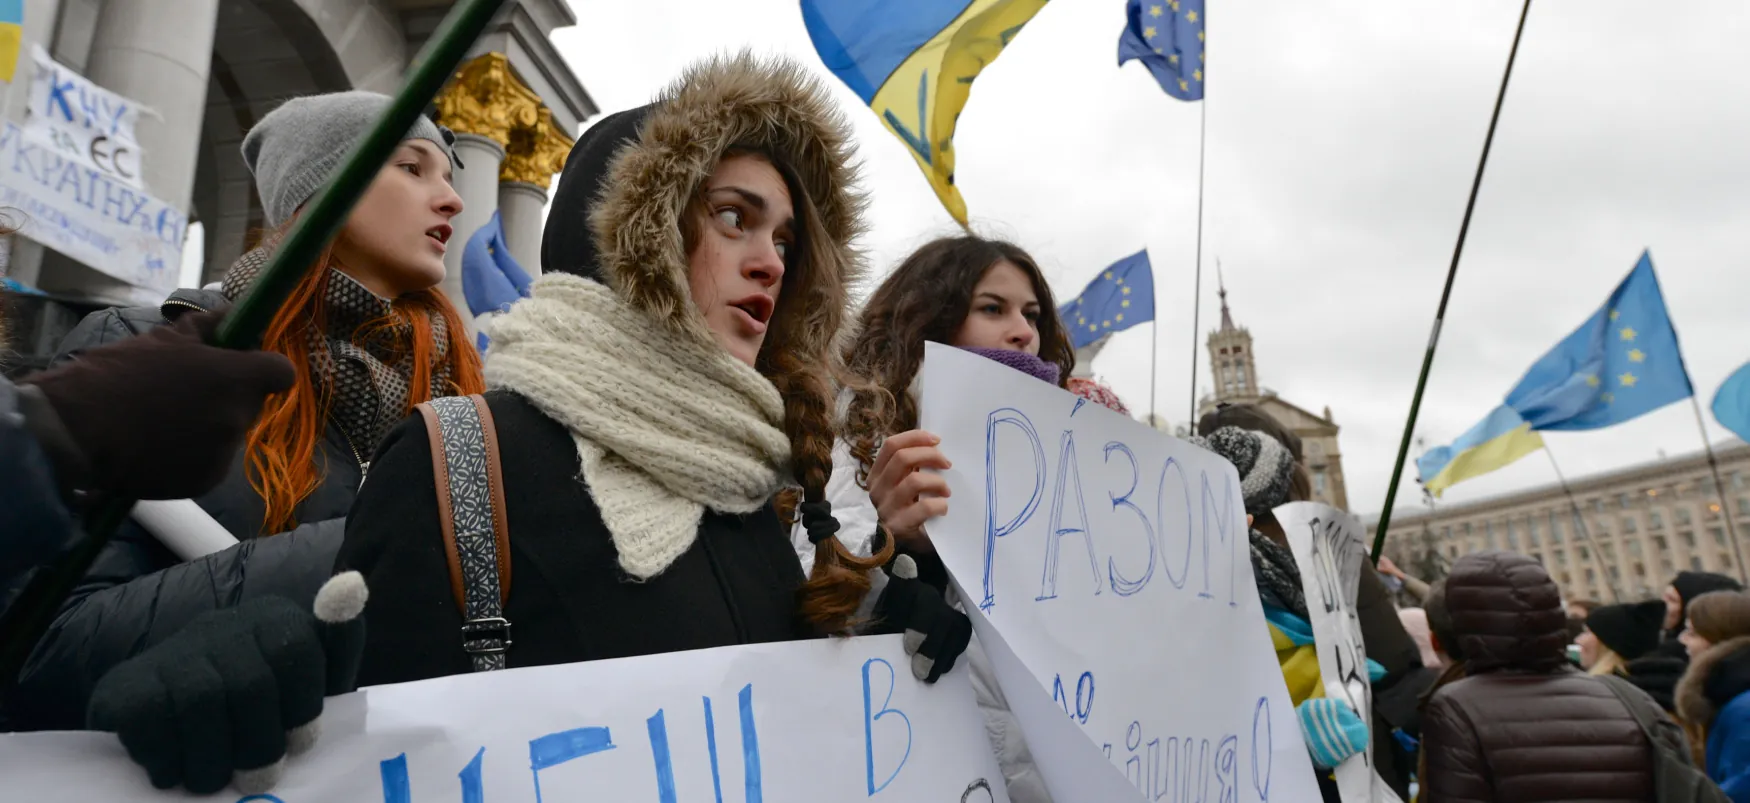 Three young people hold signs at a protest. Other protesters,  some carrying EU flags, stand in the background.